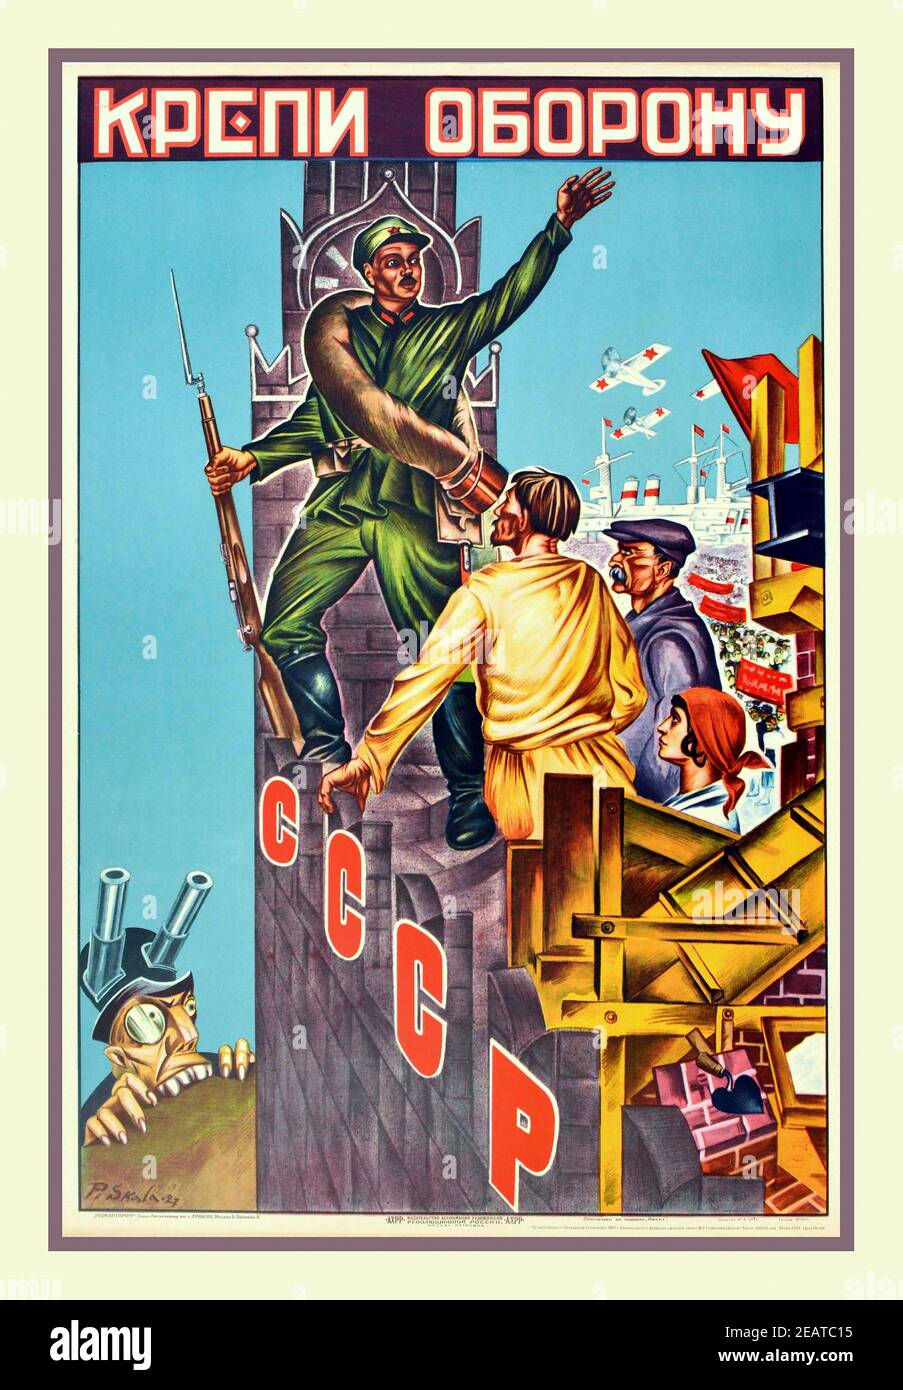 Vintage official Soviet Government  re-issue propaganda poster re-issue from 1927 - Strengthen the Defence featuring a soldier holding up a bayonet and standing on a wall being built by workers and labourers. A gremlin style capitalist character with gun canons on his top hat is spying on them from the bottom of the wall. Country of issue: Russia, designer: P. Skala,  year of printing: 1967 Stock Photo